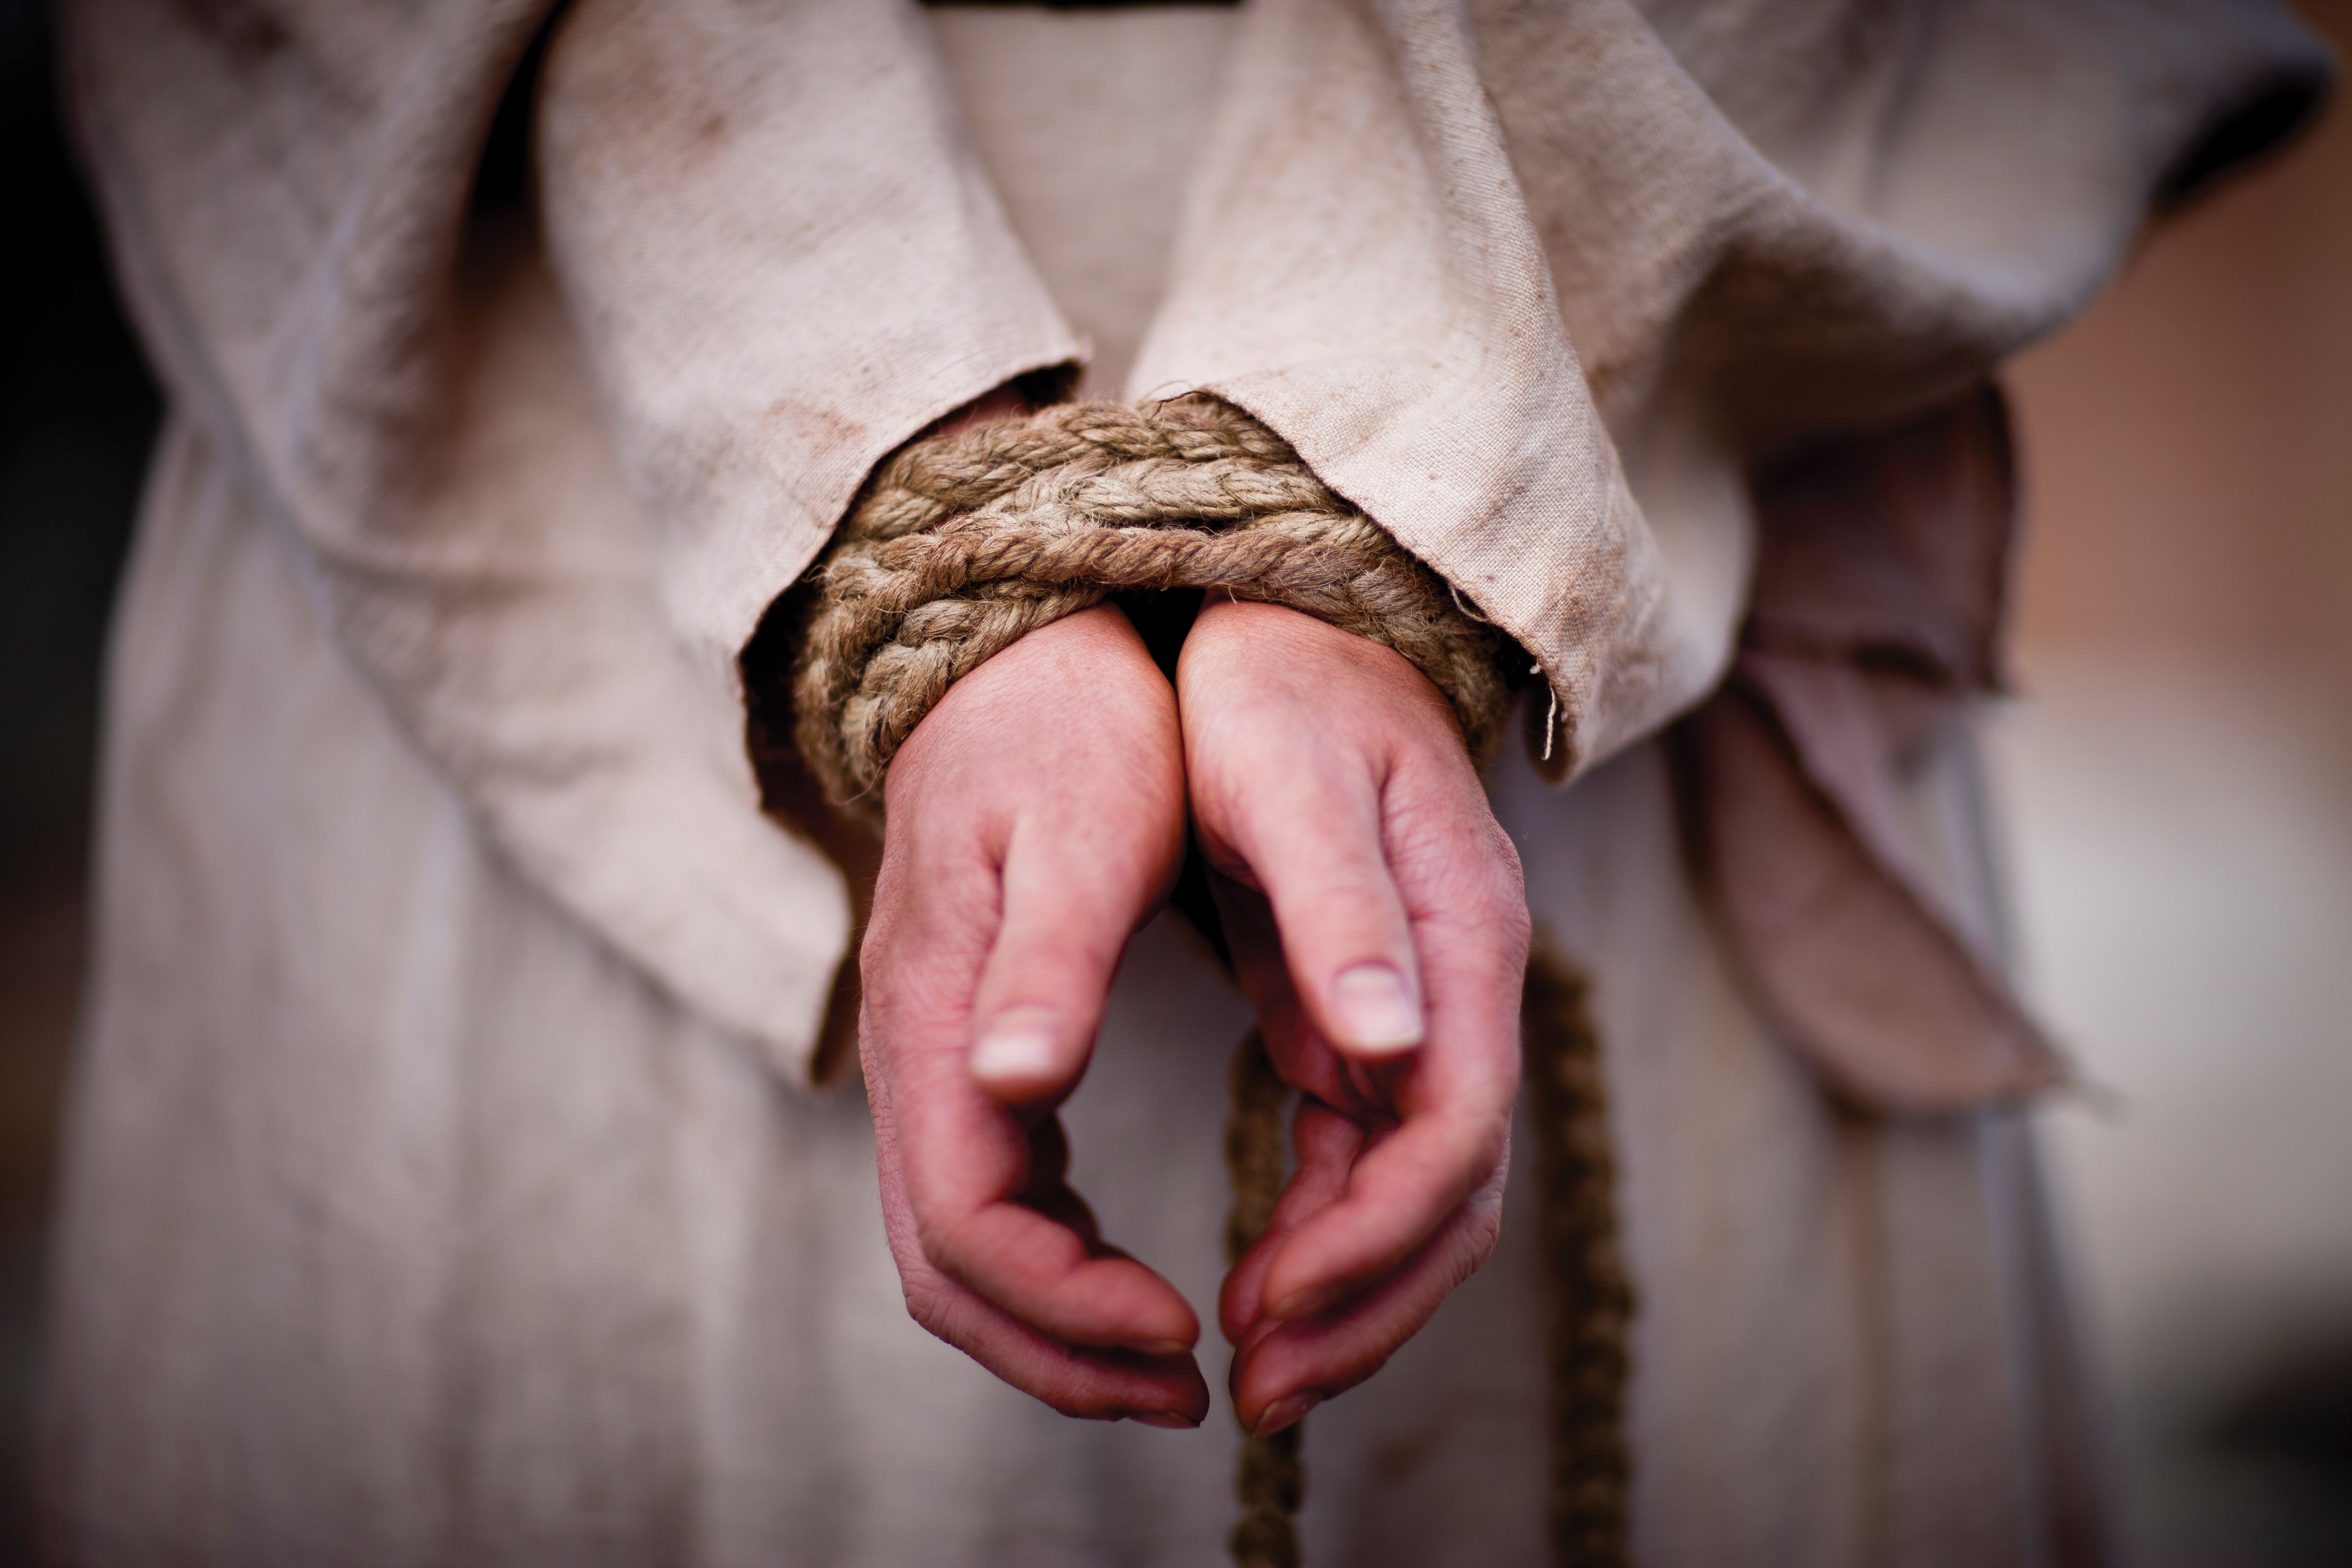 Christ’s hands after being tied together with a rope.